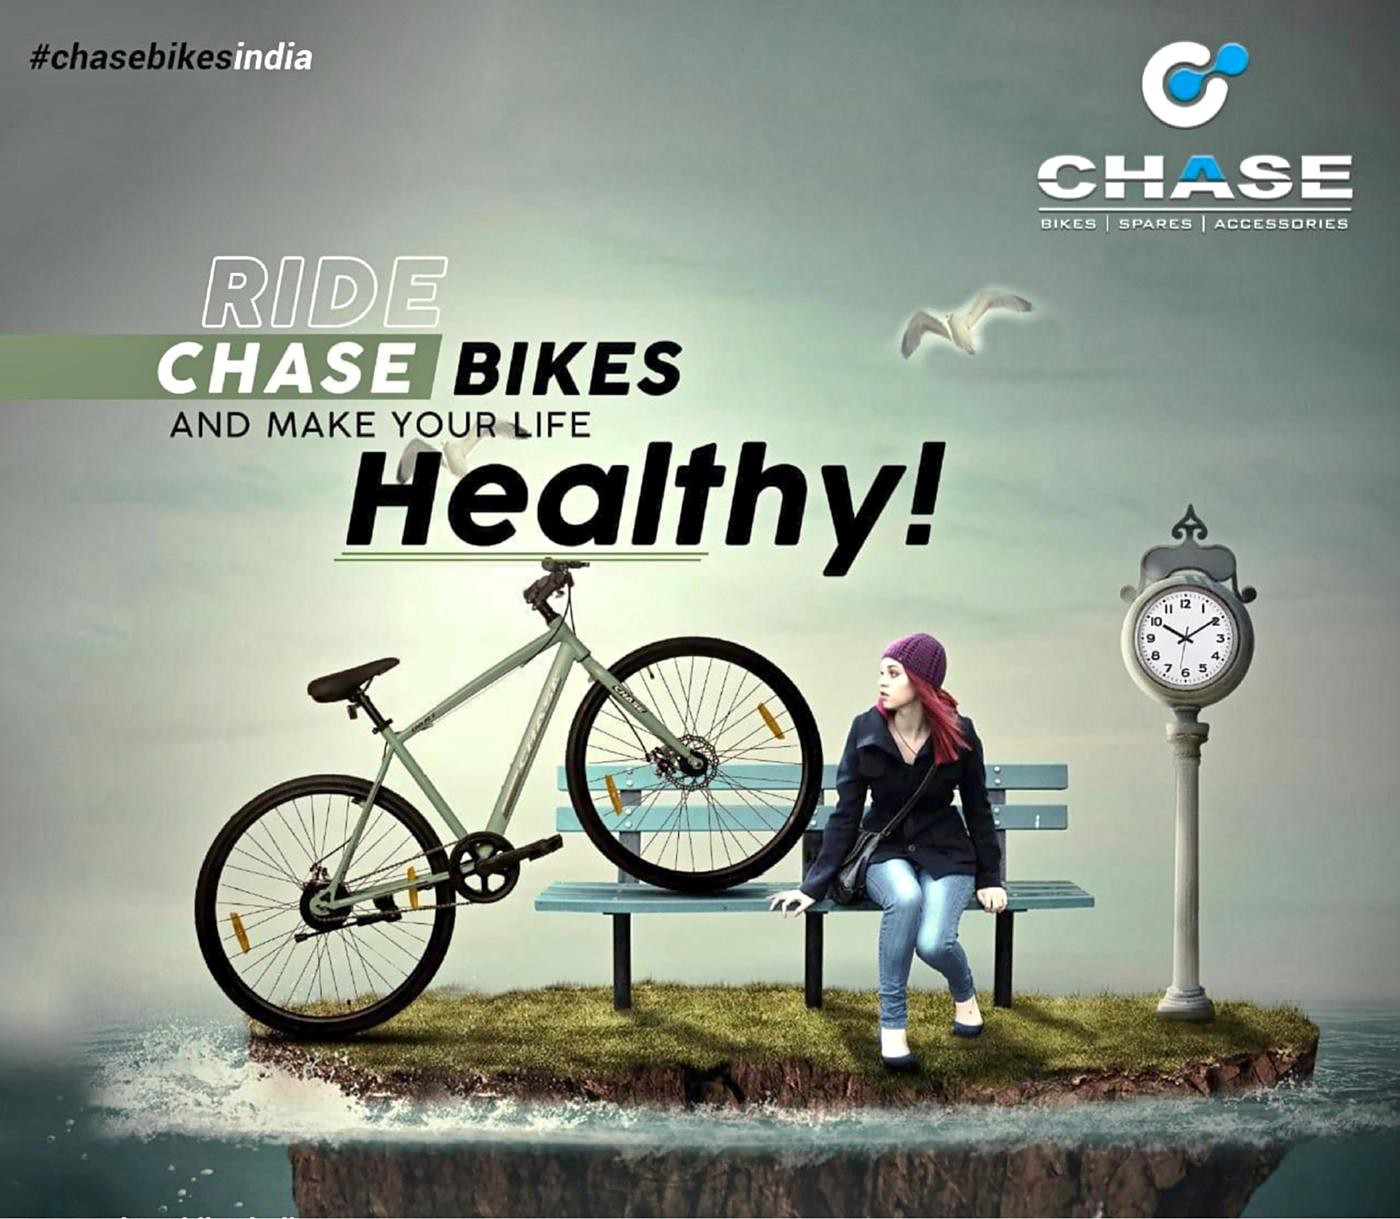 Ride Chase bikes and make your life healthy!